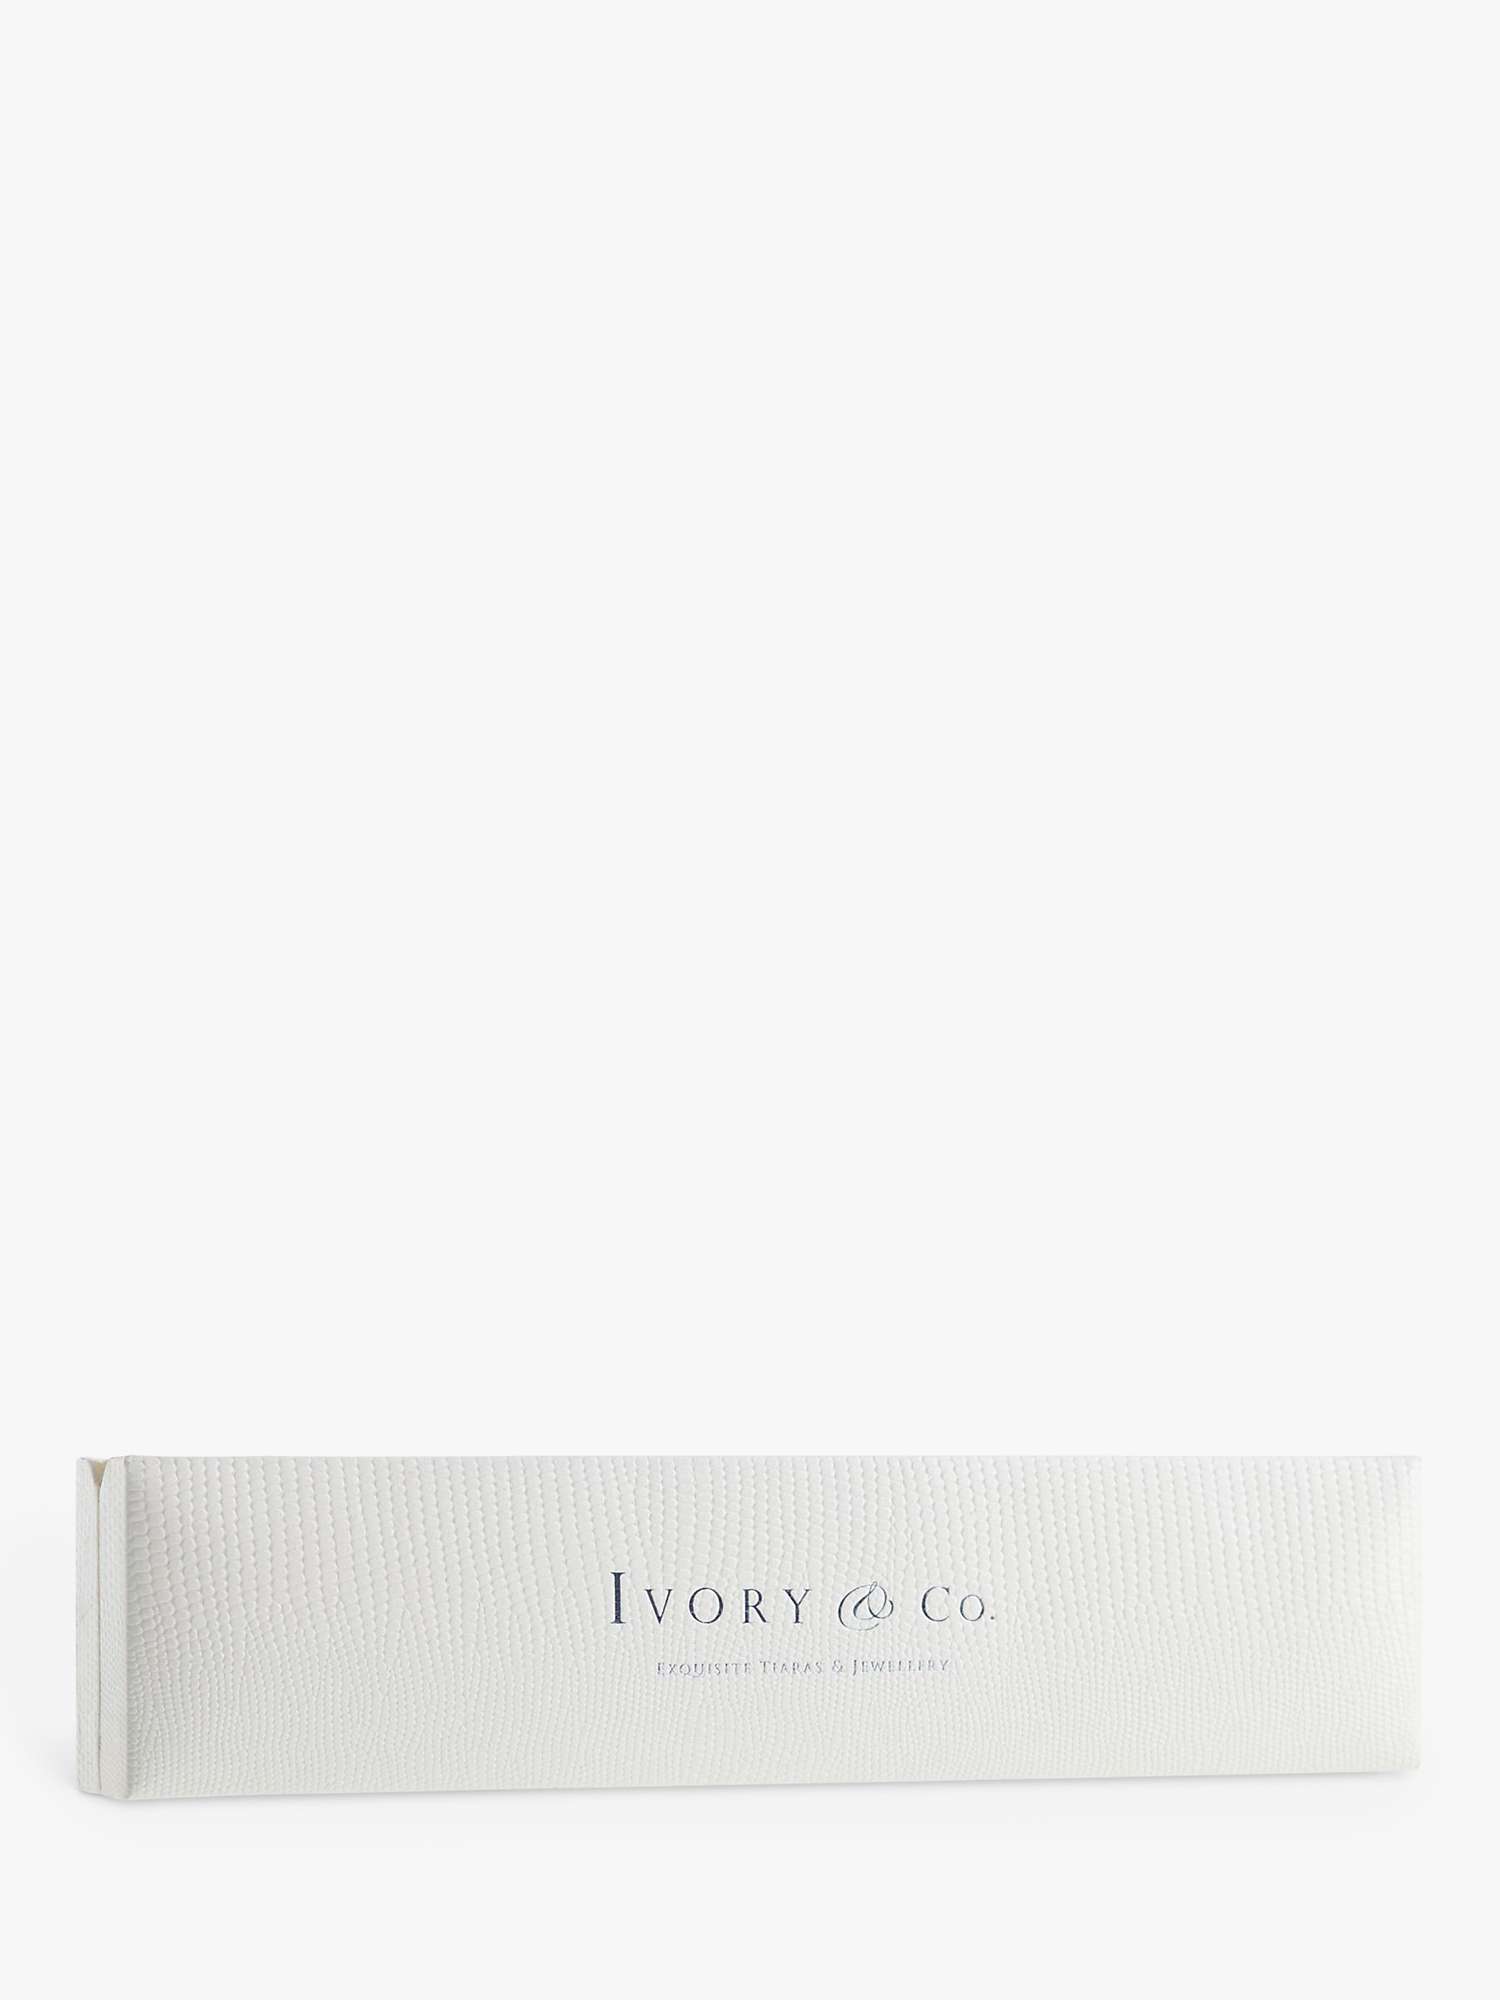 Buy Ivory & Co. Faux Pearl Bracelet, White Online at johnlewis.com